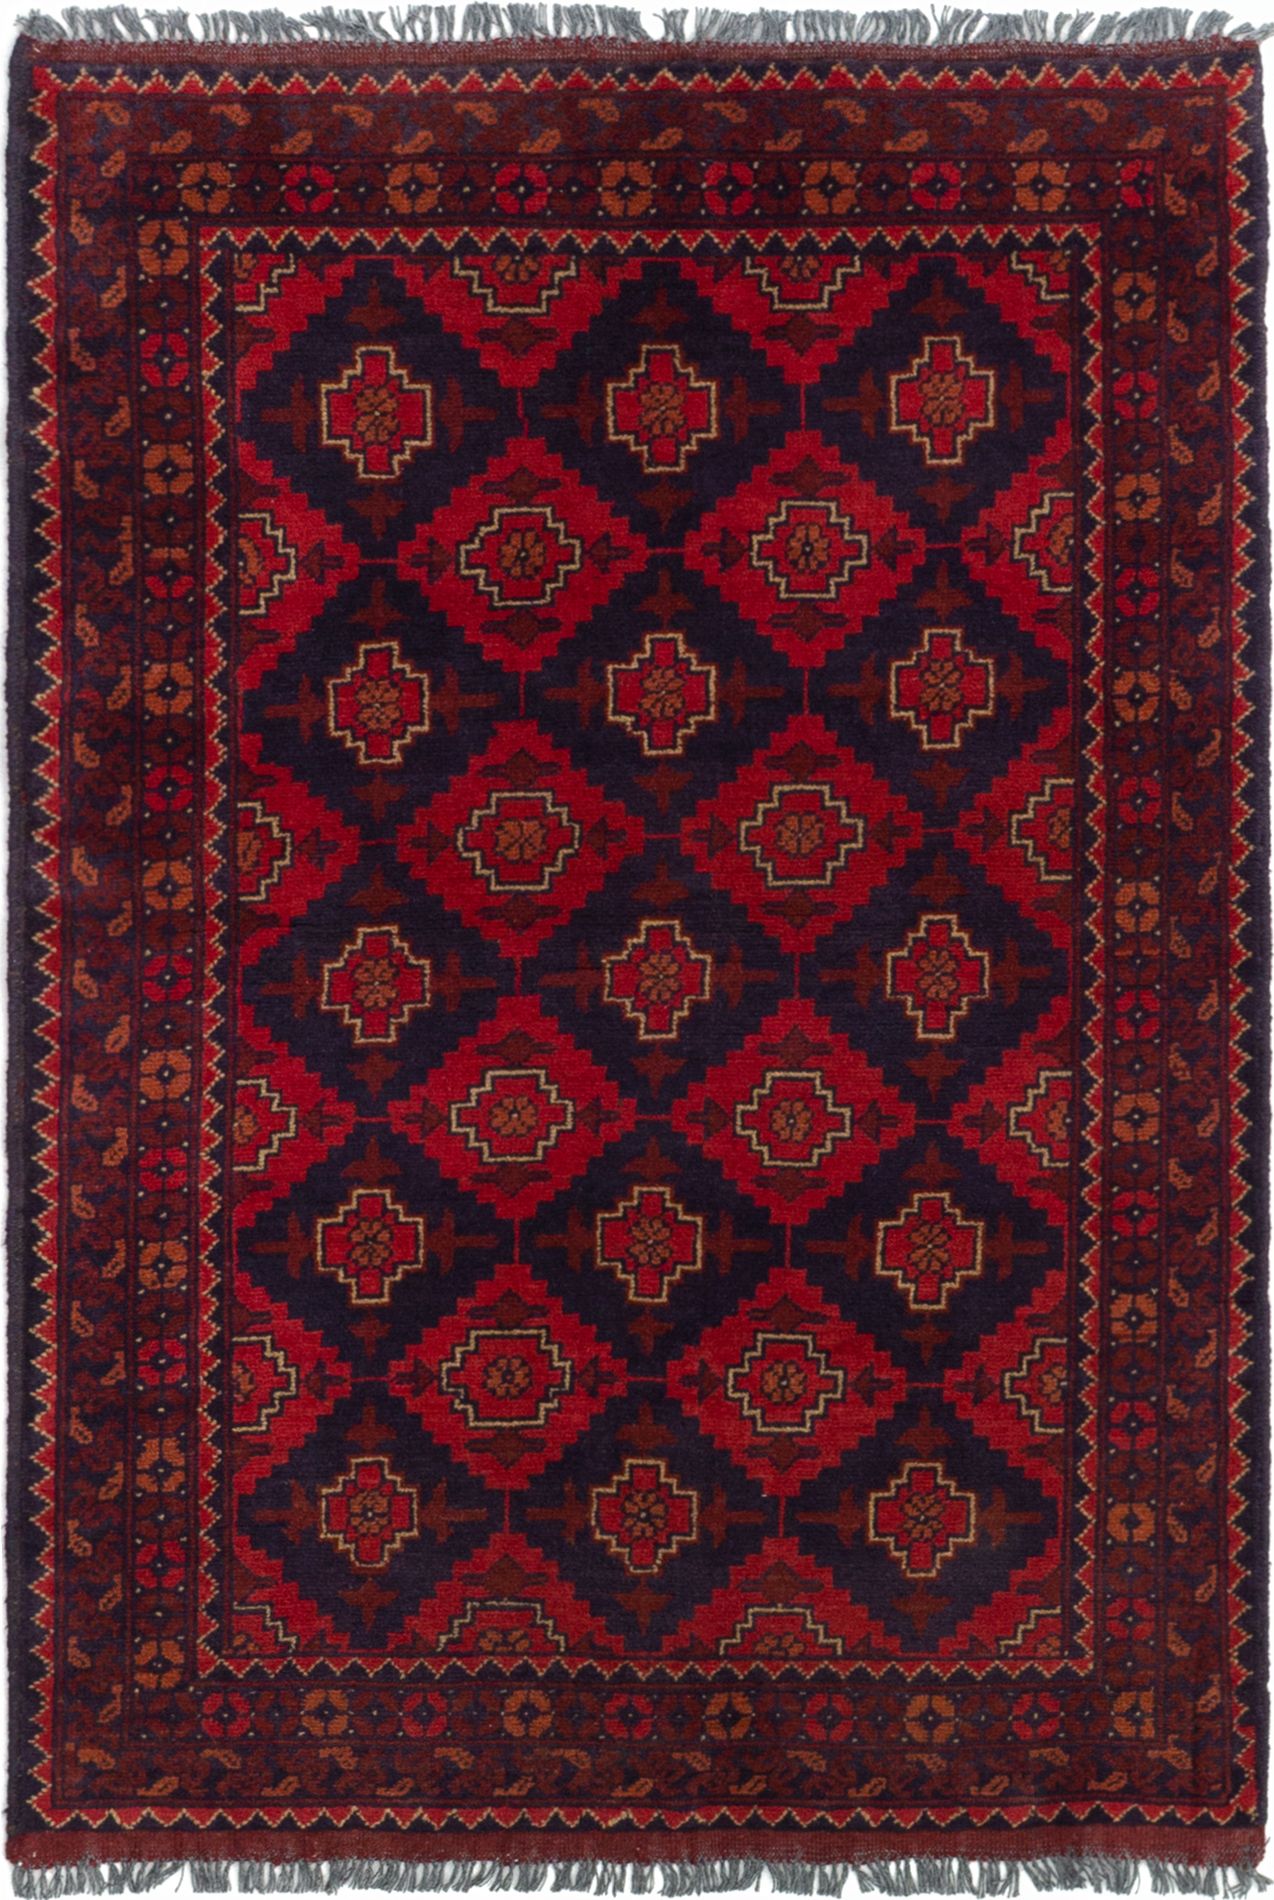 Hand-knotted Finest Khal Mohammadi Red Wool Rug 3'2" x 4'10" (19) Size: 3'2" x 4'10"  